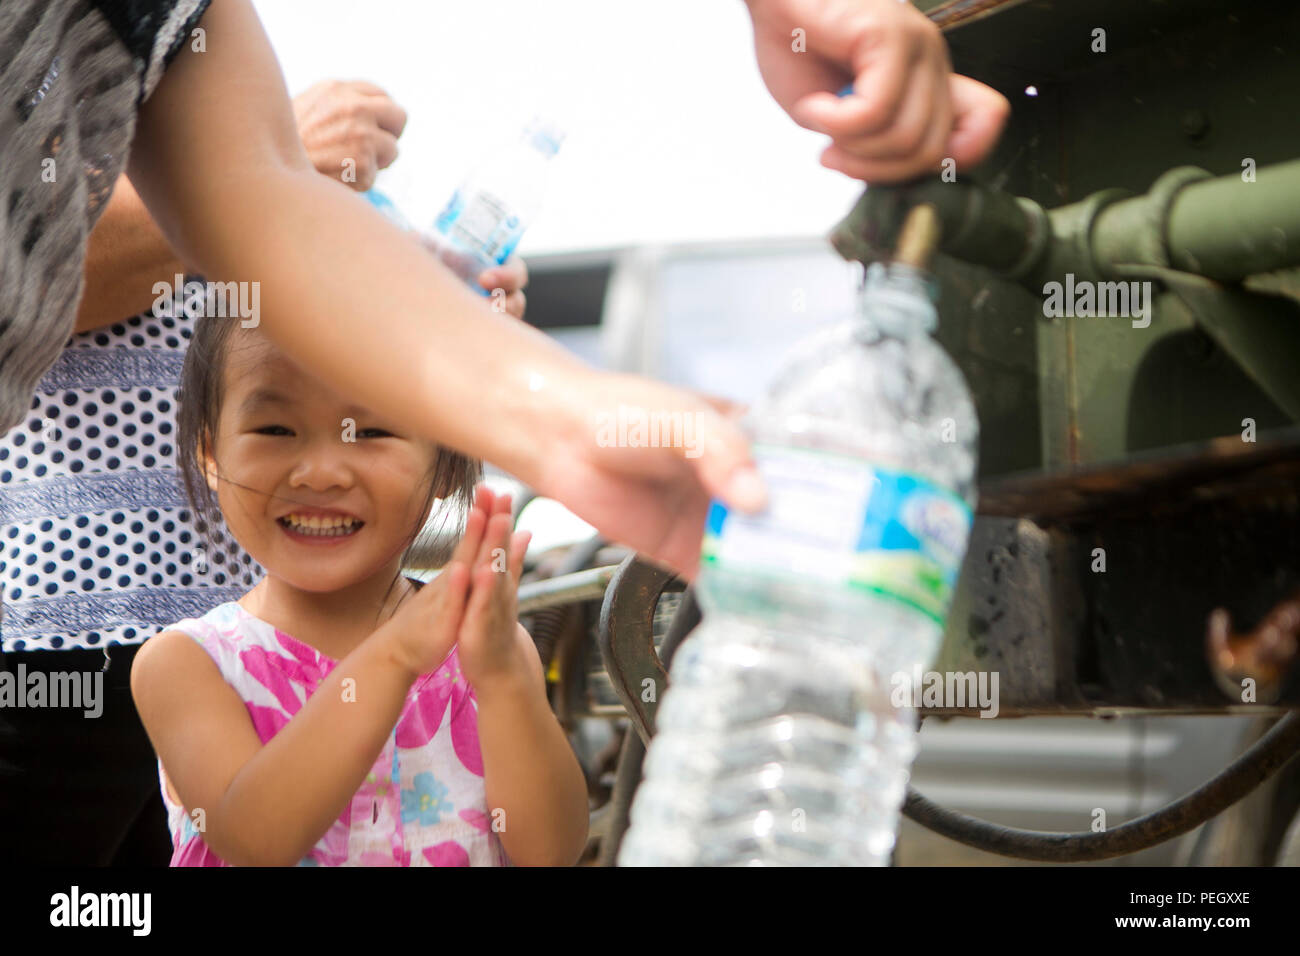 A young girl watches her parents fill water bottles while U.S. Marines with Combat Logistics Battalion 31, 31st Marine Expeditionary Unit, distribute water to local civilians during typhoon relief efforts in Saipan, Aug. 13, 2015. The Marines and sailors of the 31st MEU assisted the people of Saipan by producing and distributing potable water. The MEU was conducting training near the Mariana Islands when it was redirected to Saipan after the island was struck by Typhoon Soudelor Aug. 2-3. (U.S. Marine Corps photo by Lance Cpl. Brian Bekkala/Released) Stock Photo